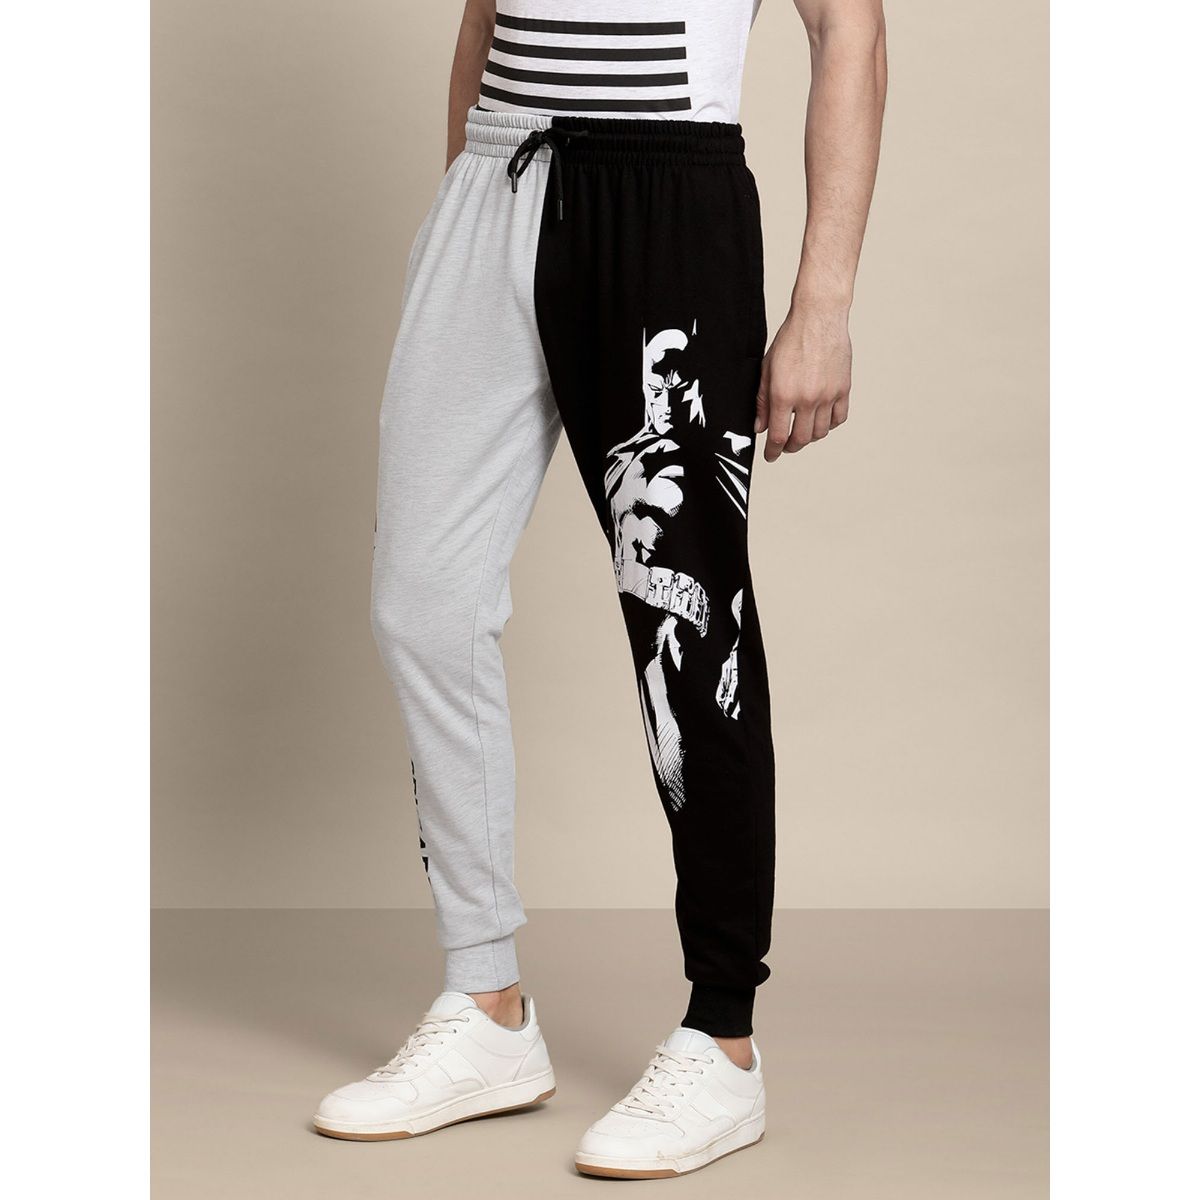 Buy FREE AUTHORITY Blue Printed Cotton Mens Track Pants | Shoppers Stop